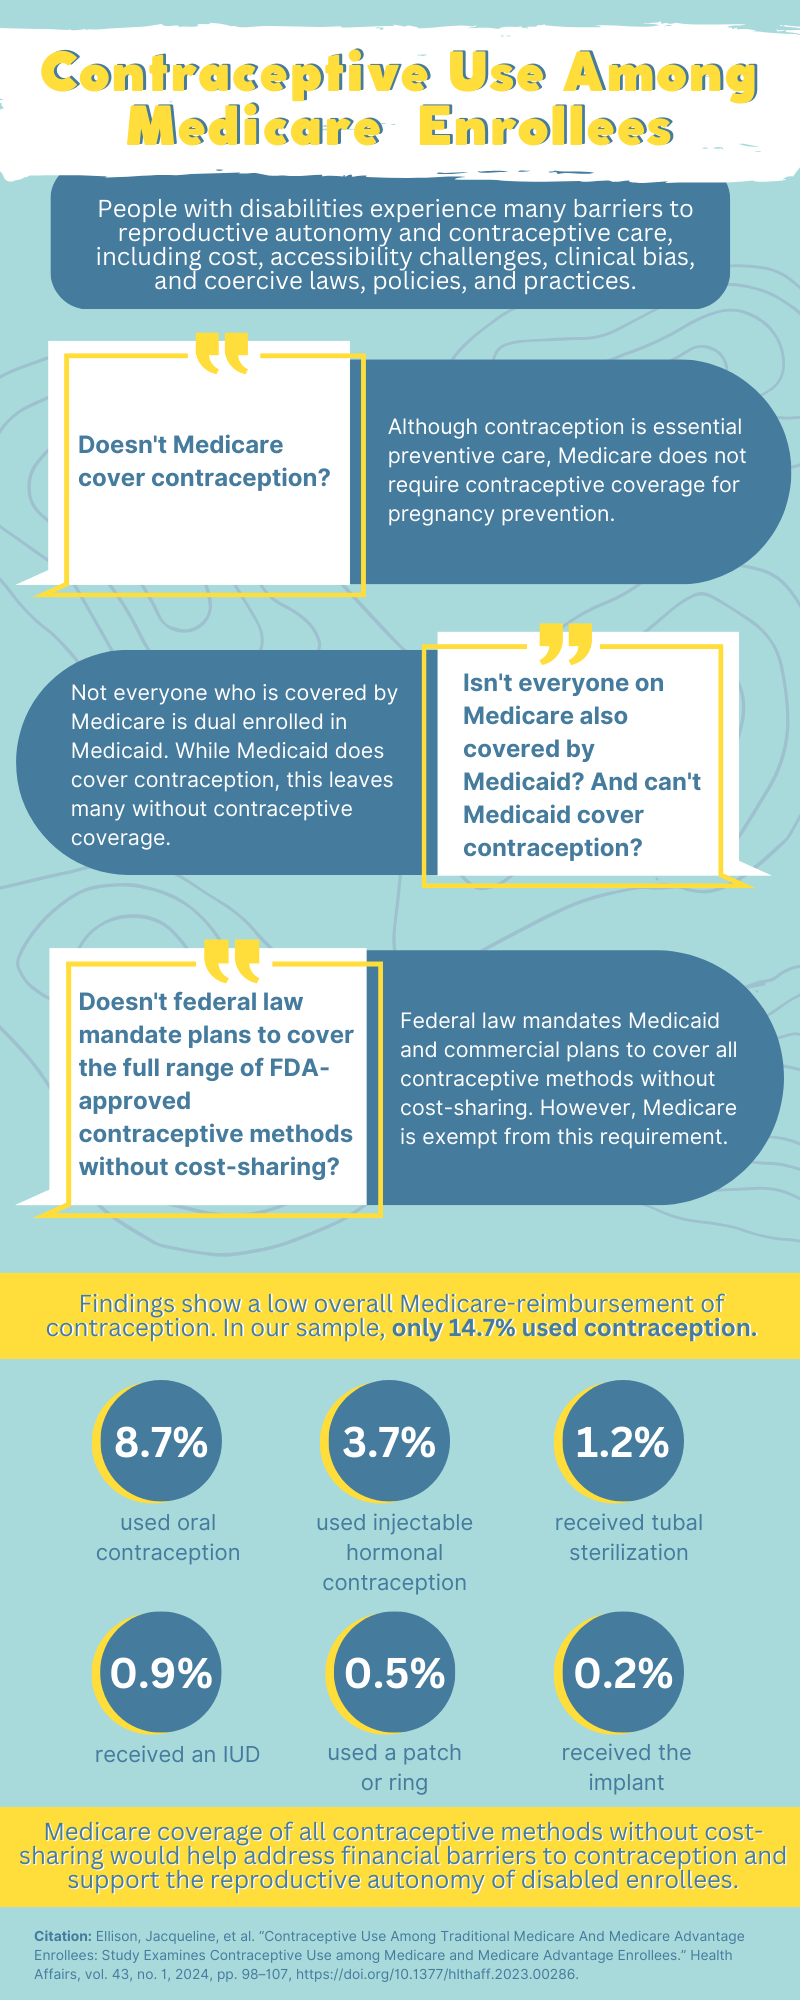 Contraceptive Use Among Traditional Medicare And Medicare Advantage Enrollees